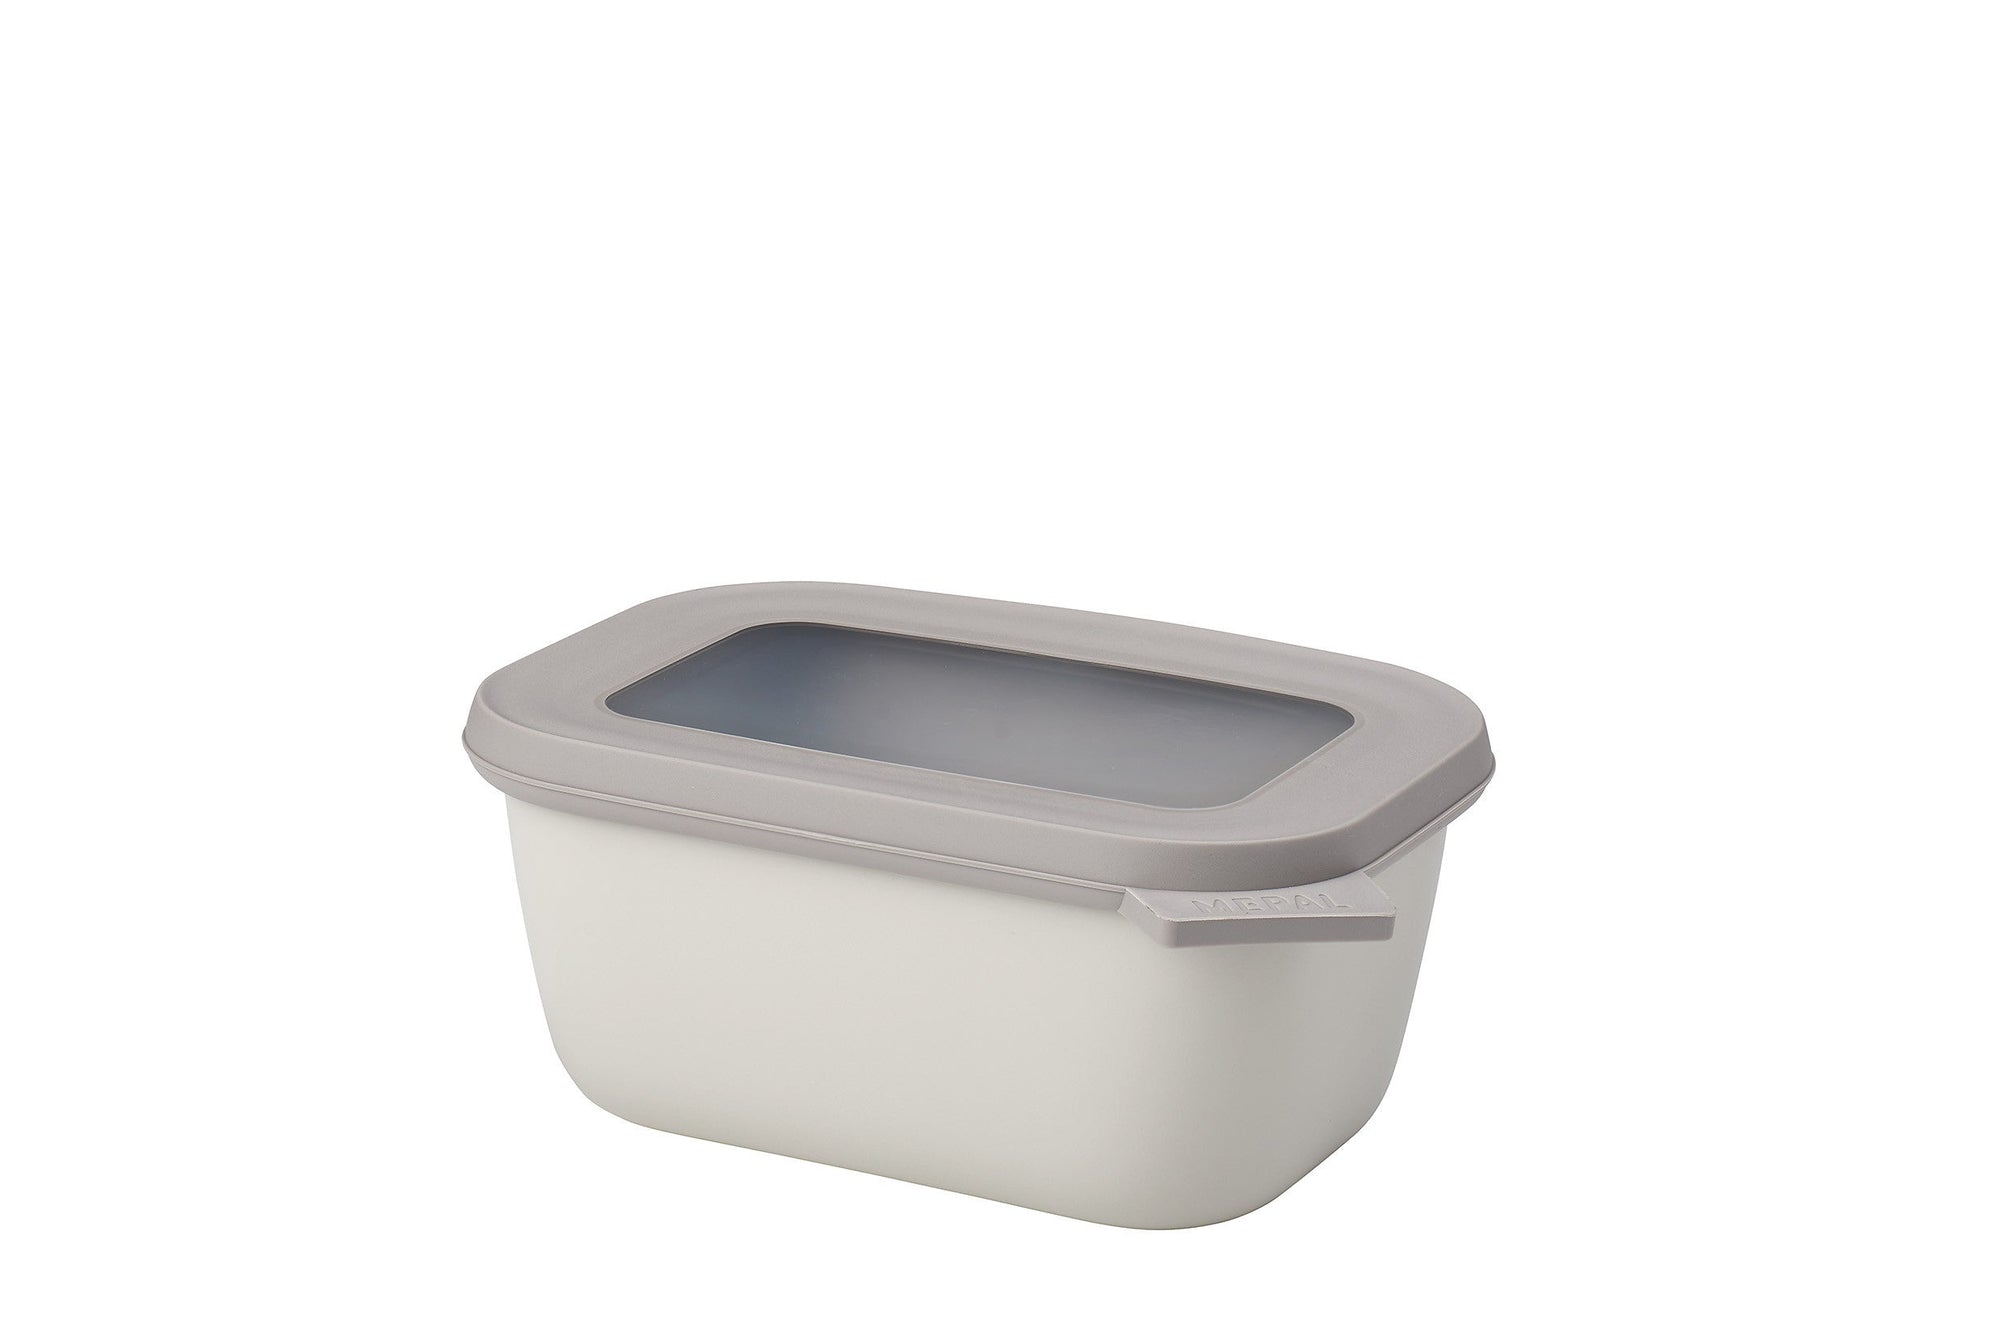 Cirqula 750mL Freezer Container Nordic White - KITCHEN - Food Containers - Soko and Co